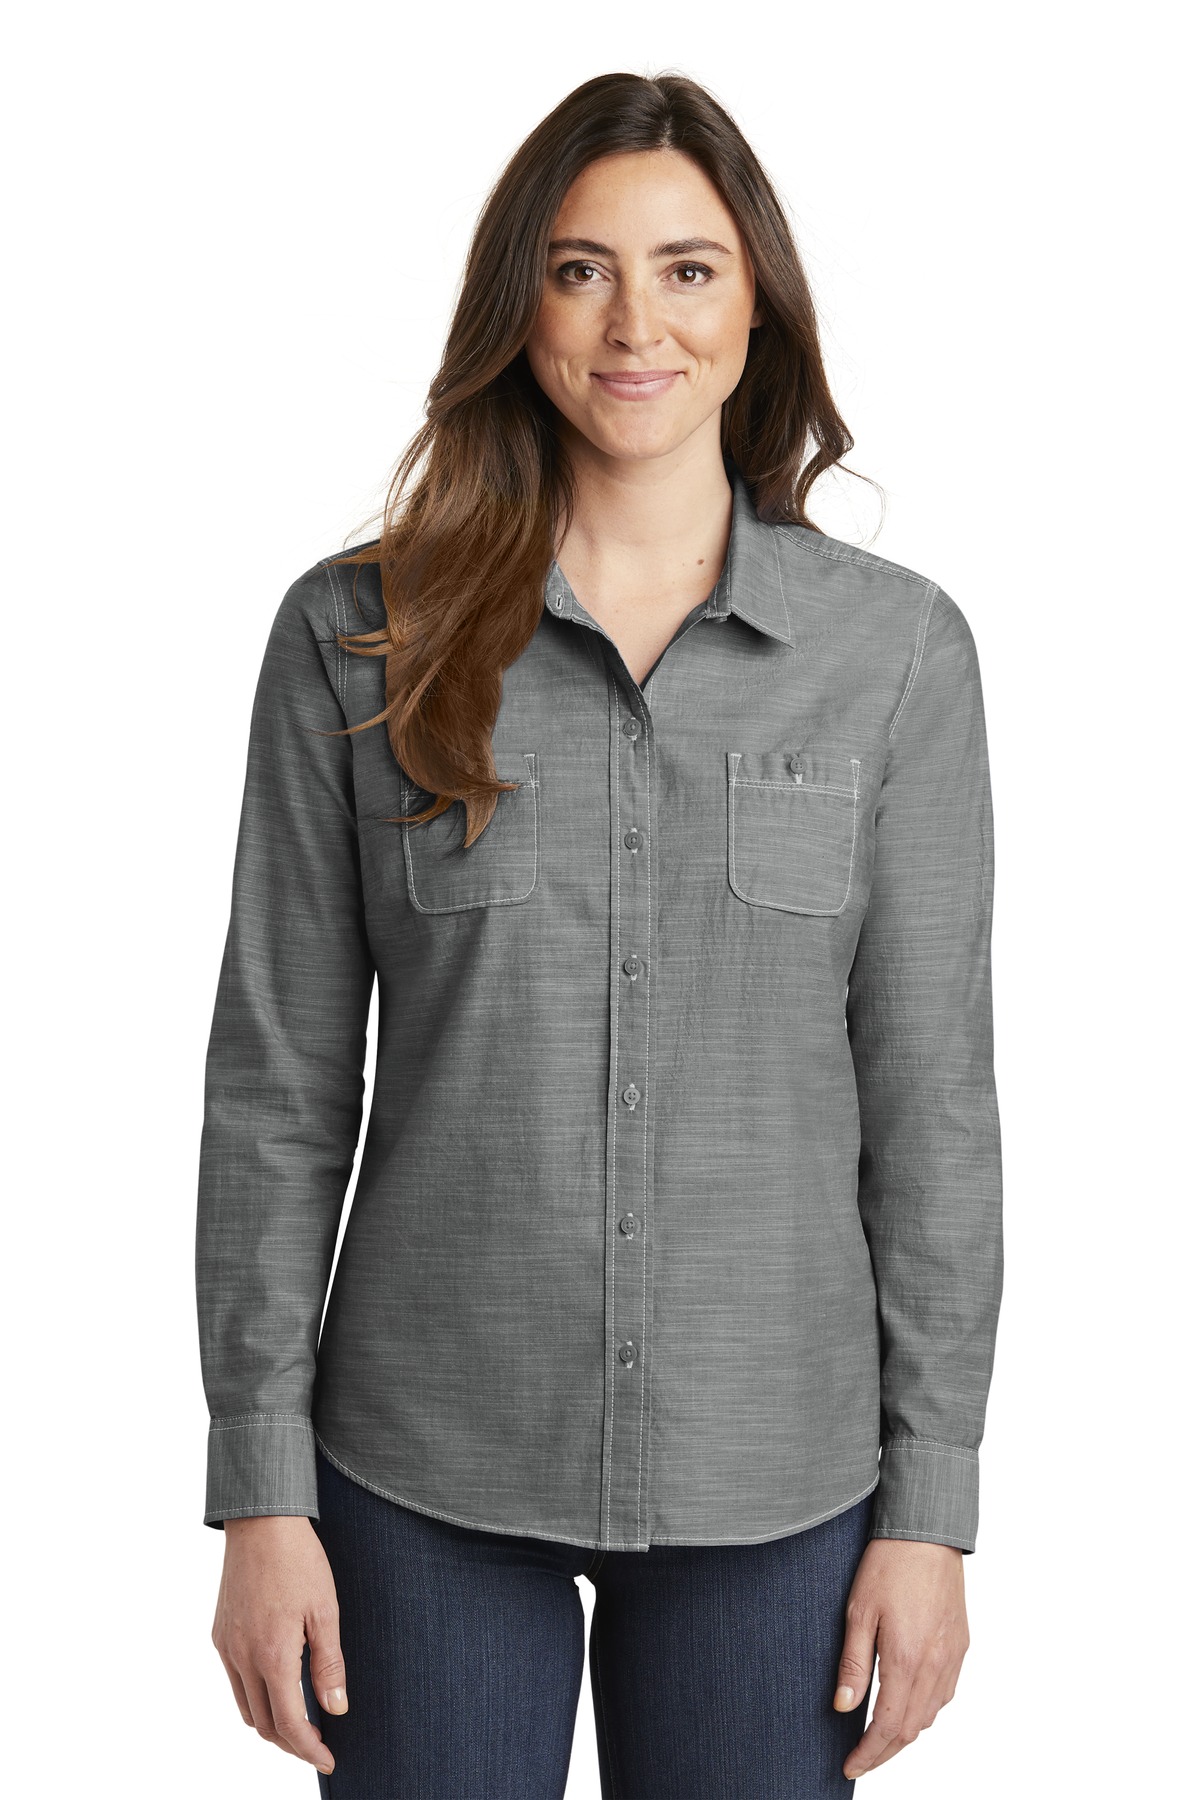 Port Authority Ladies Woven Shirts for Hospitality- ® Ladies Slub Chambray Shirt.-Port Authority